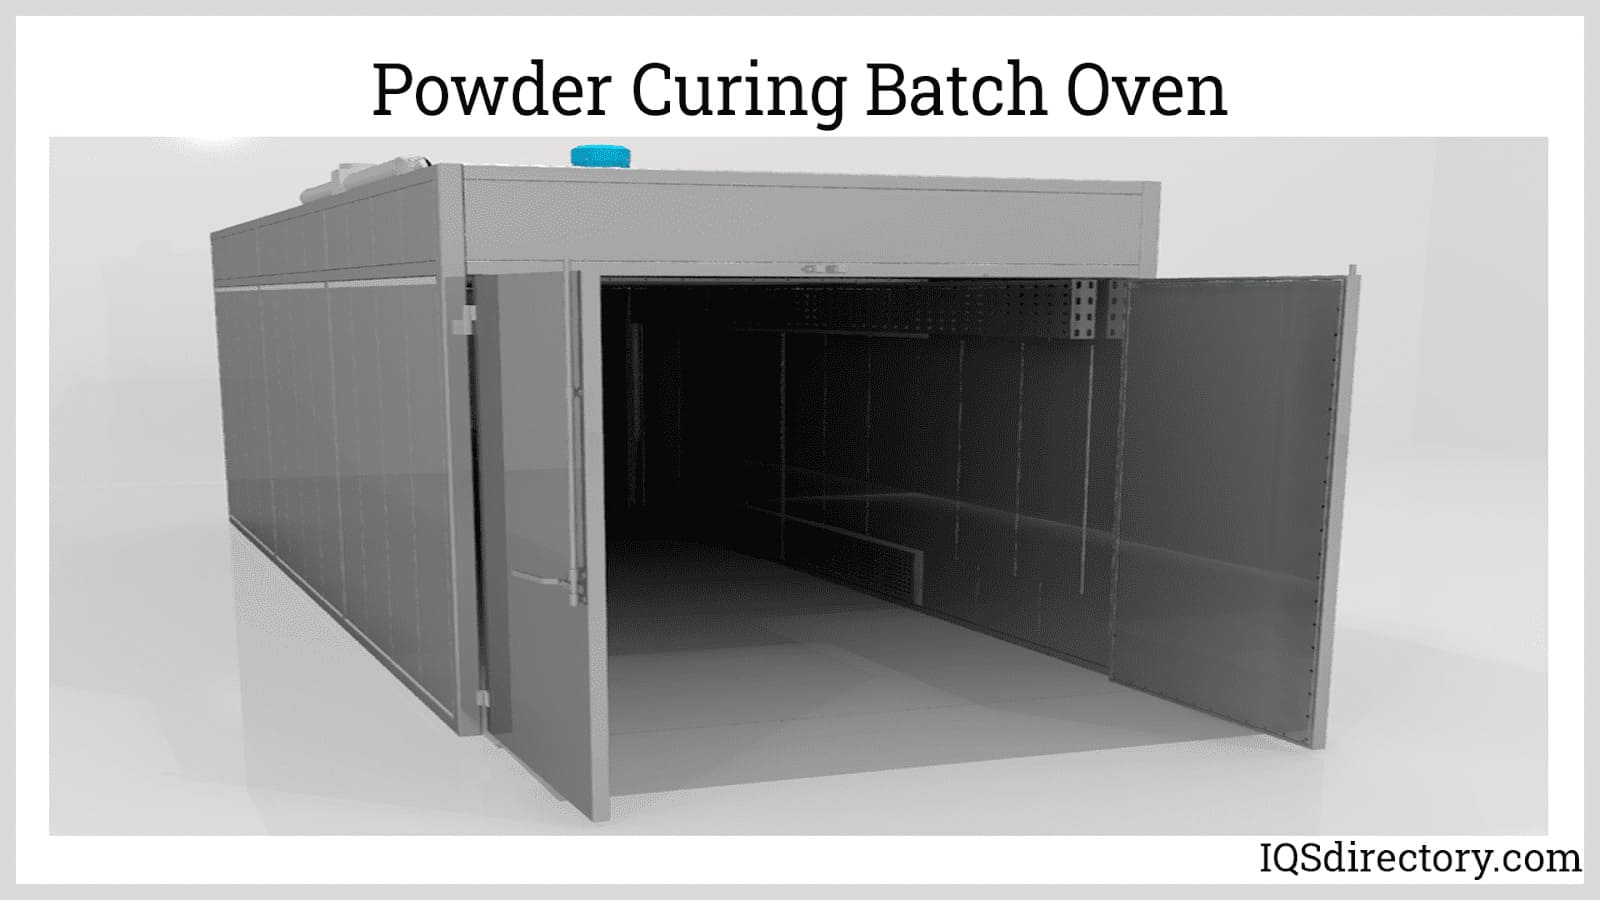 https://www.iqsdirectory.com/articles/industrial-oven/powder-curing-batch-oven.jpg